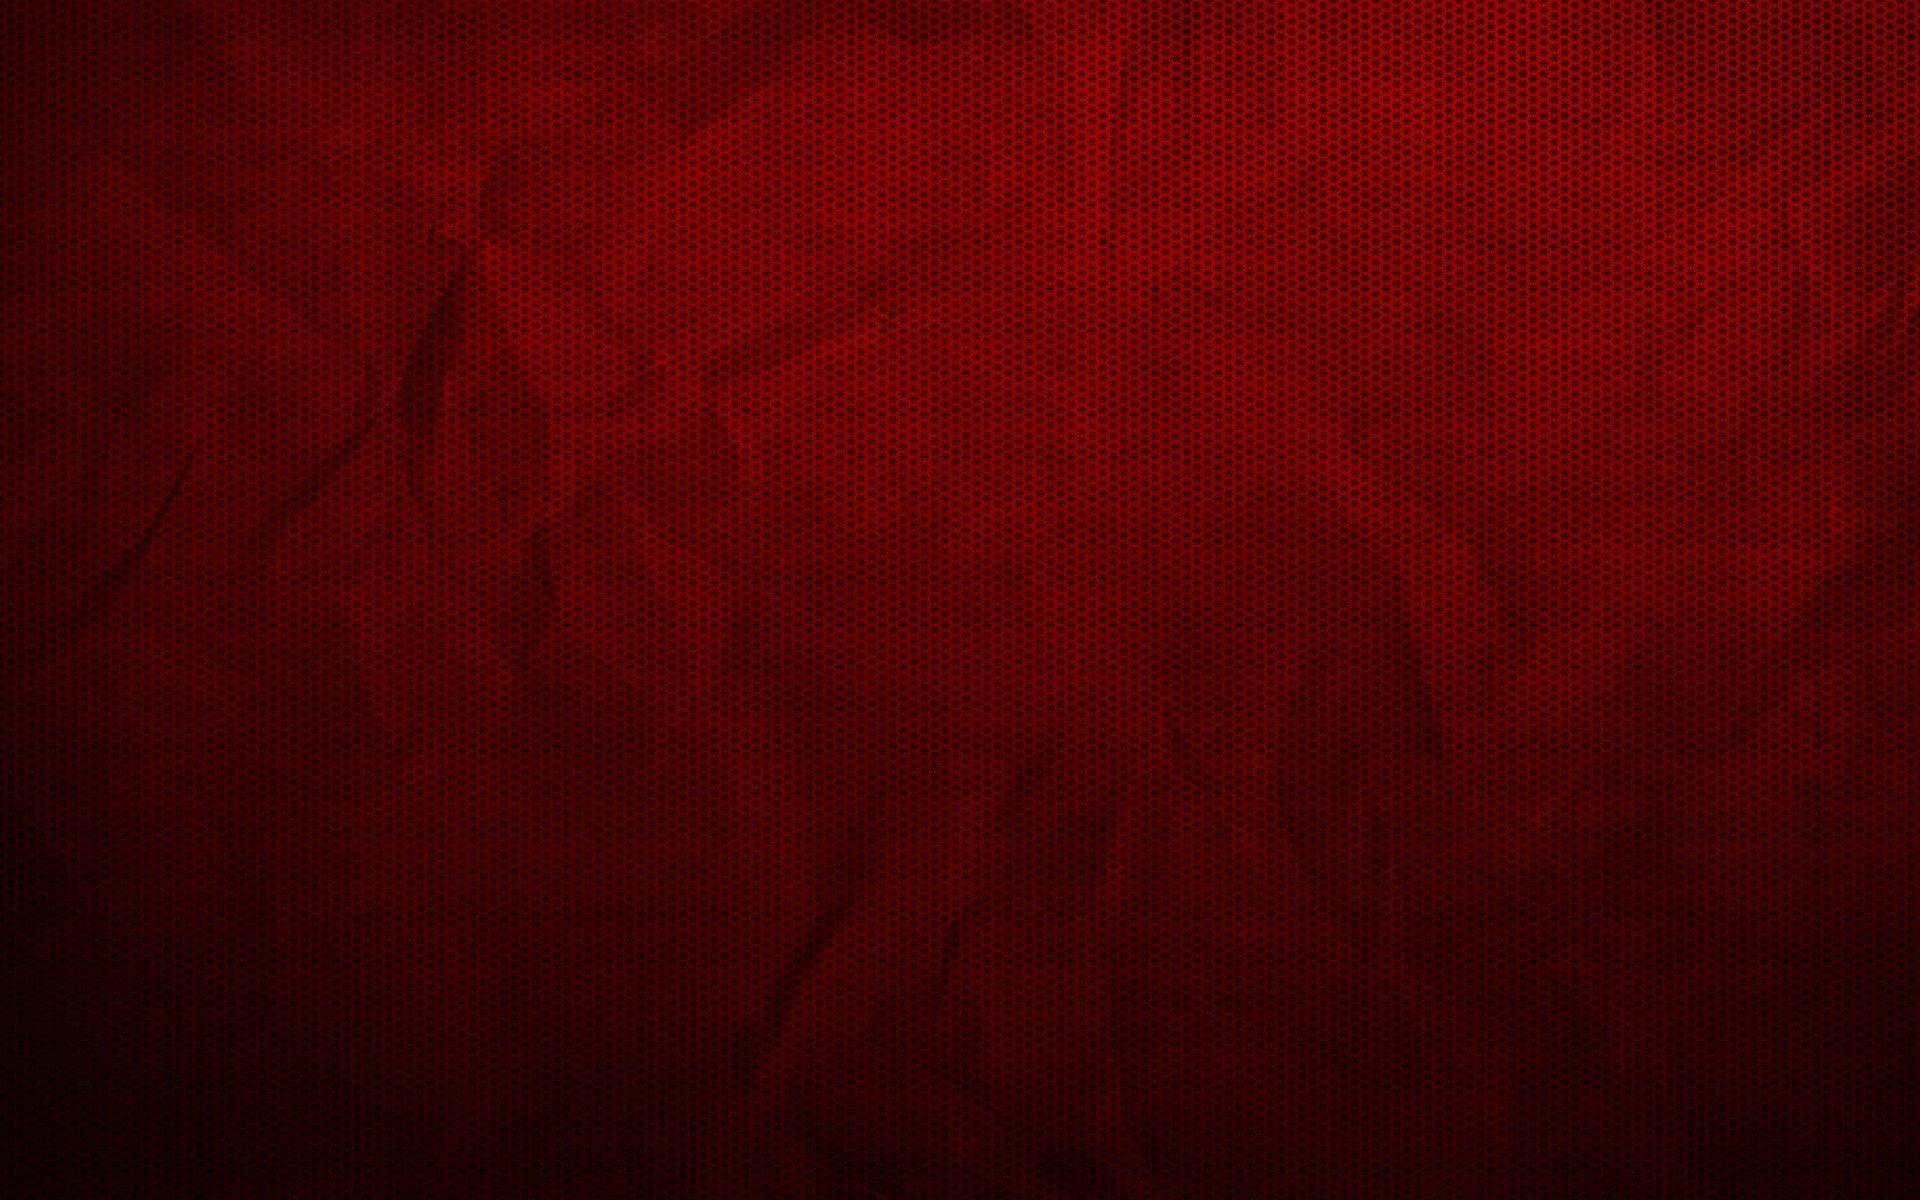 dark red textured wallpaper 5b5c271abababa186c749db60e936d90